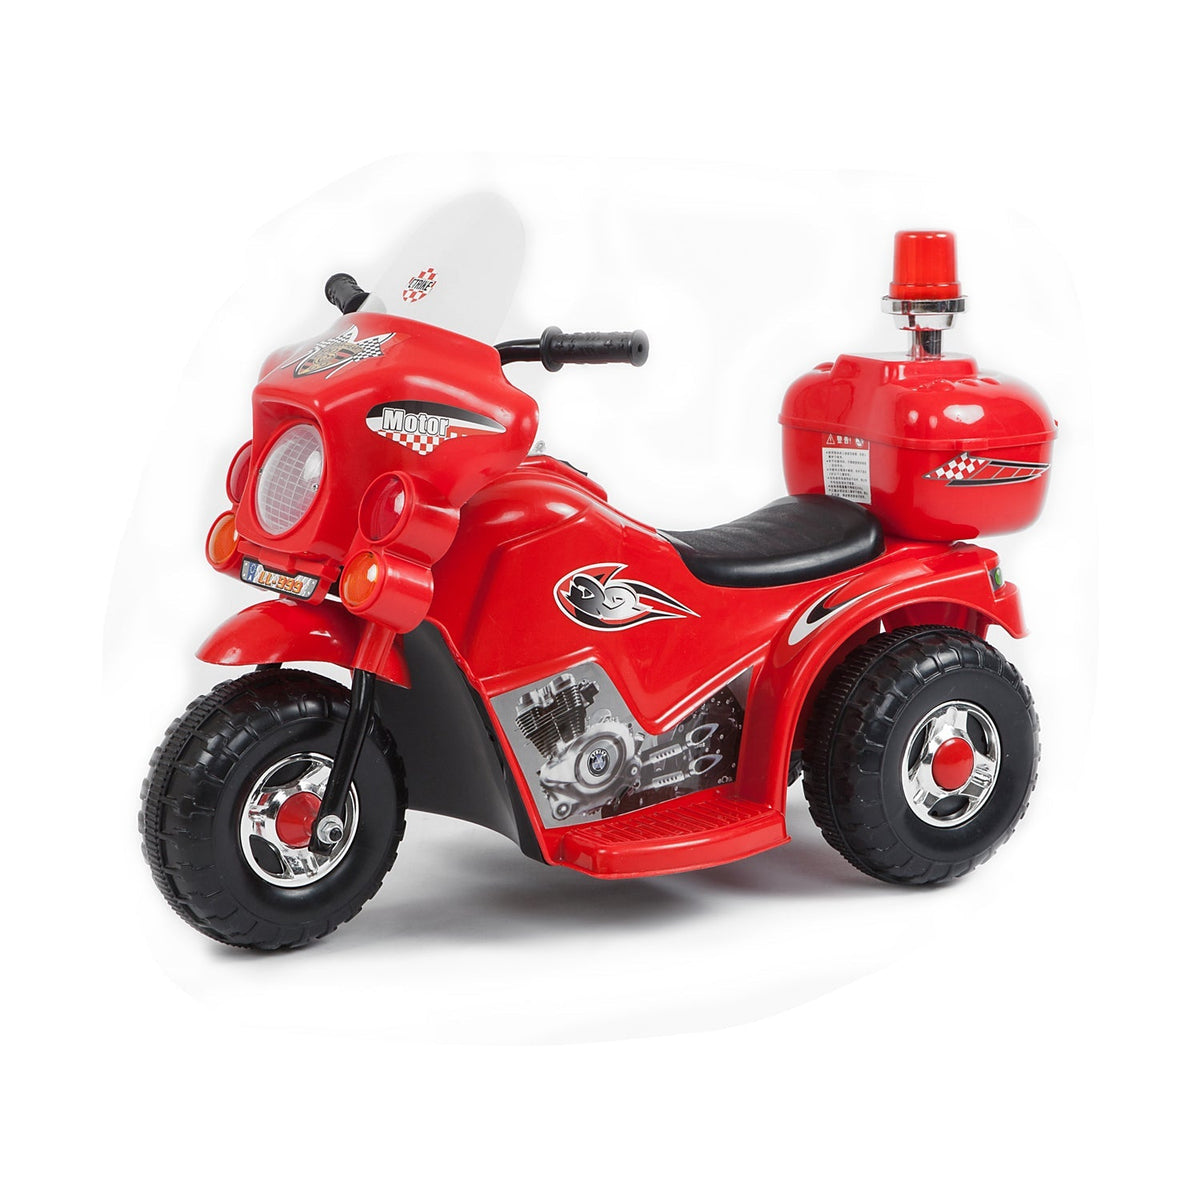 Red Children's Electric Ride-on Motorcycle.